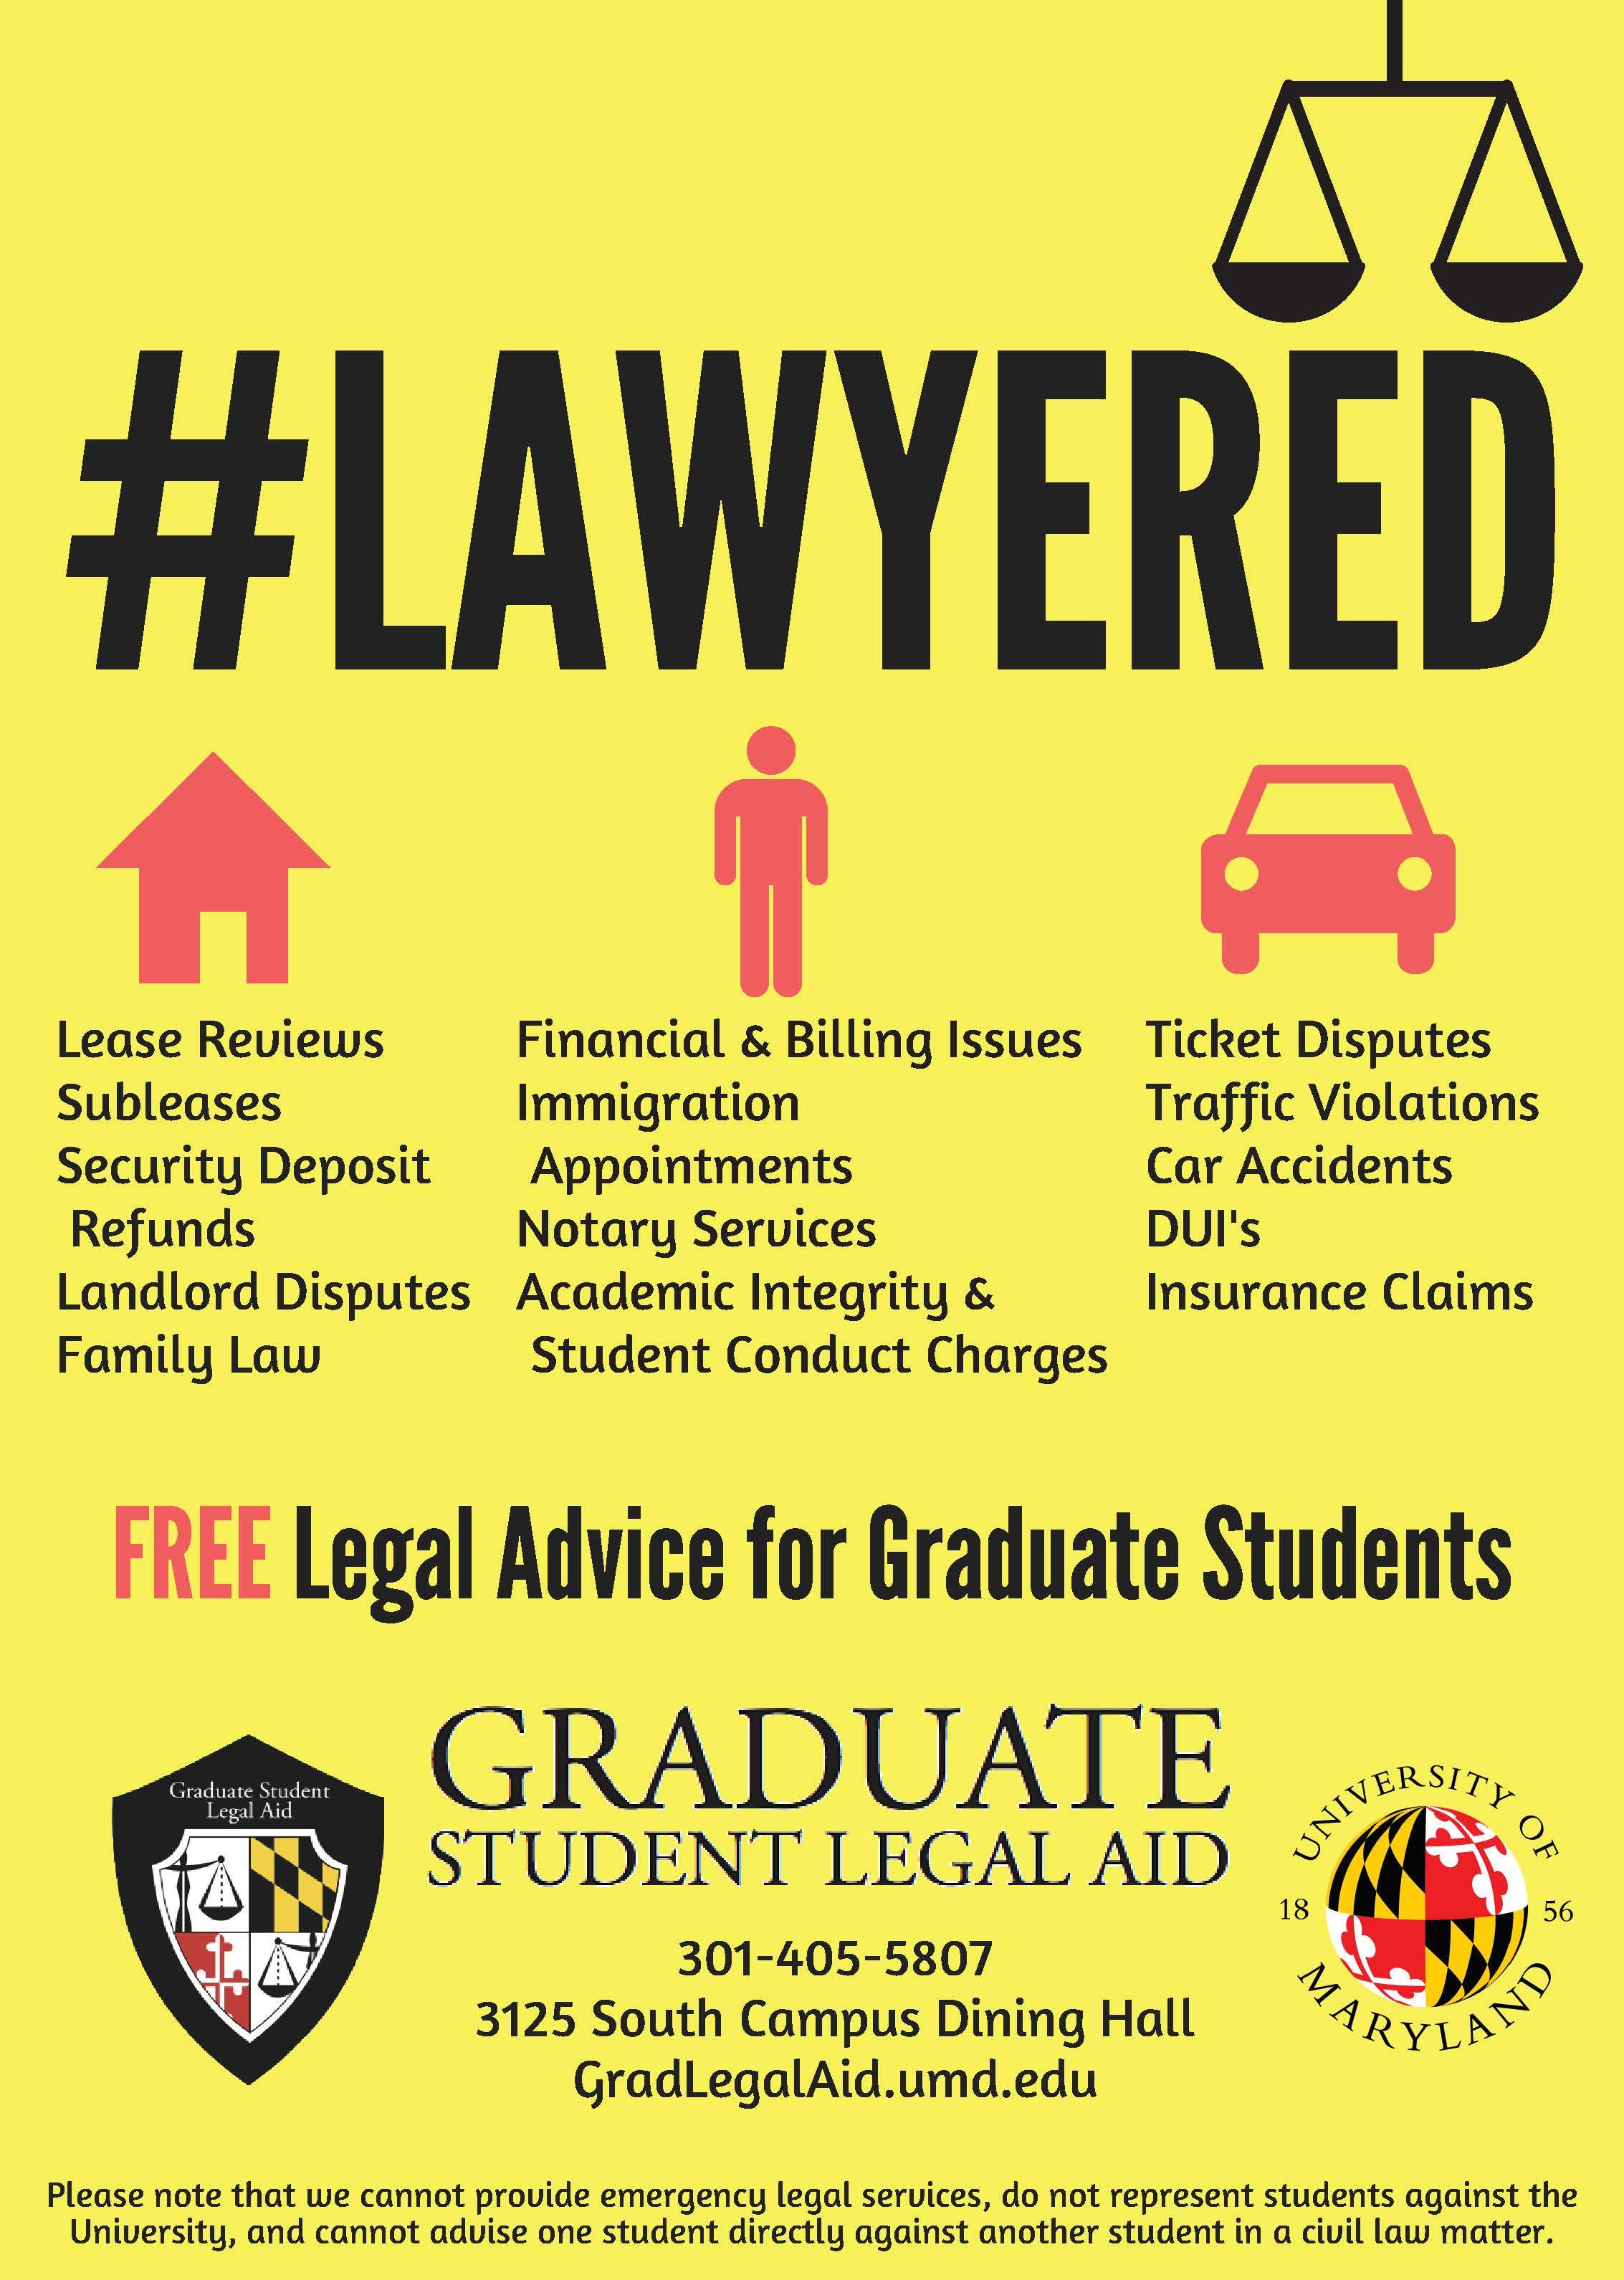 #Lawyered free legal advice for graduate students